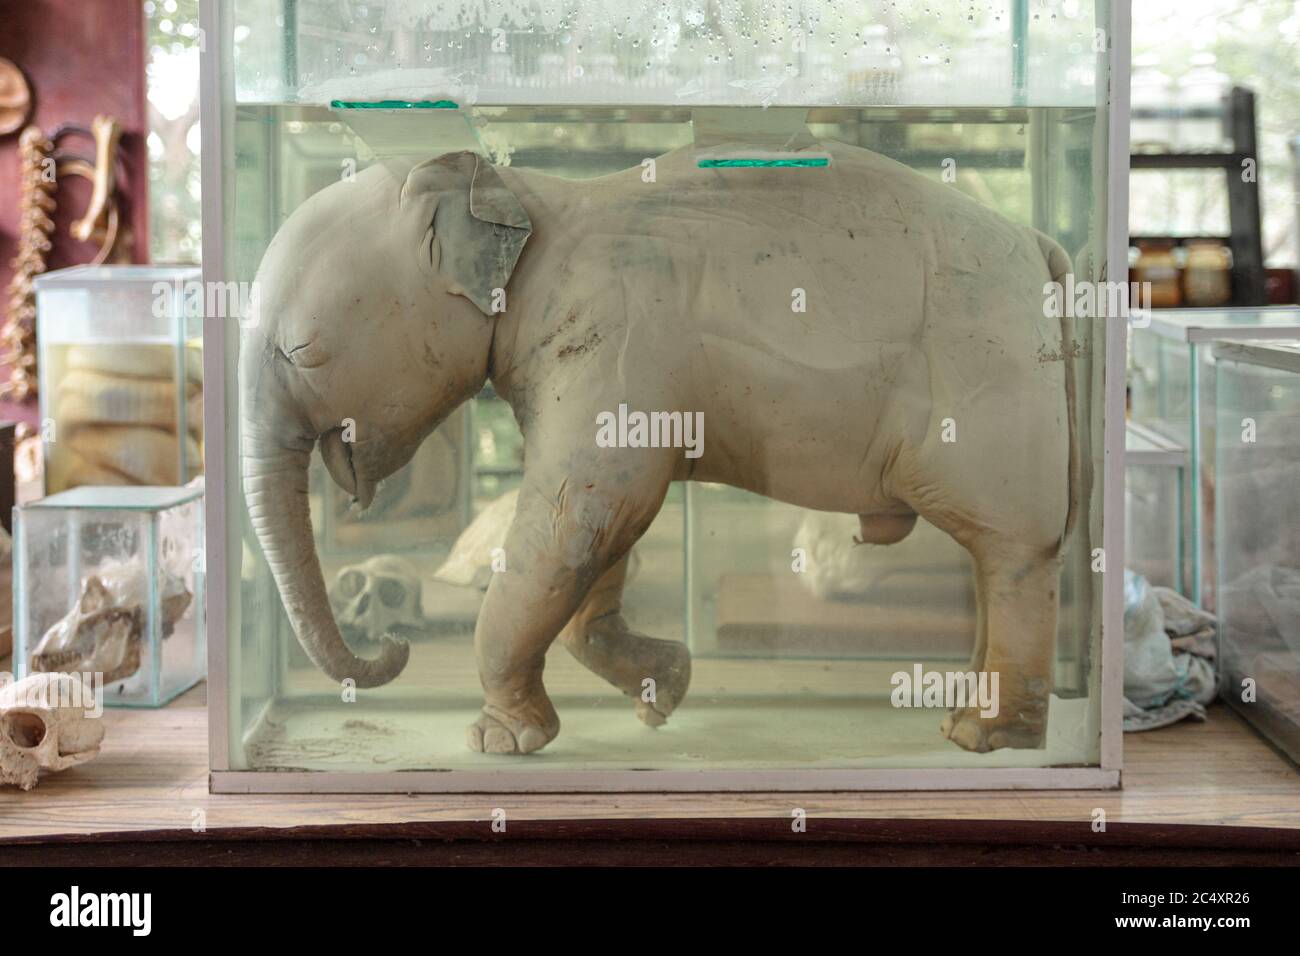 Baby elephant fetus preserved in formalin - formaldehyde in a glass container used on research and study purpose. Stock Photo